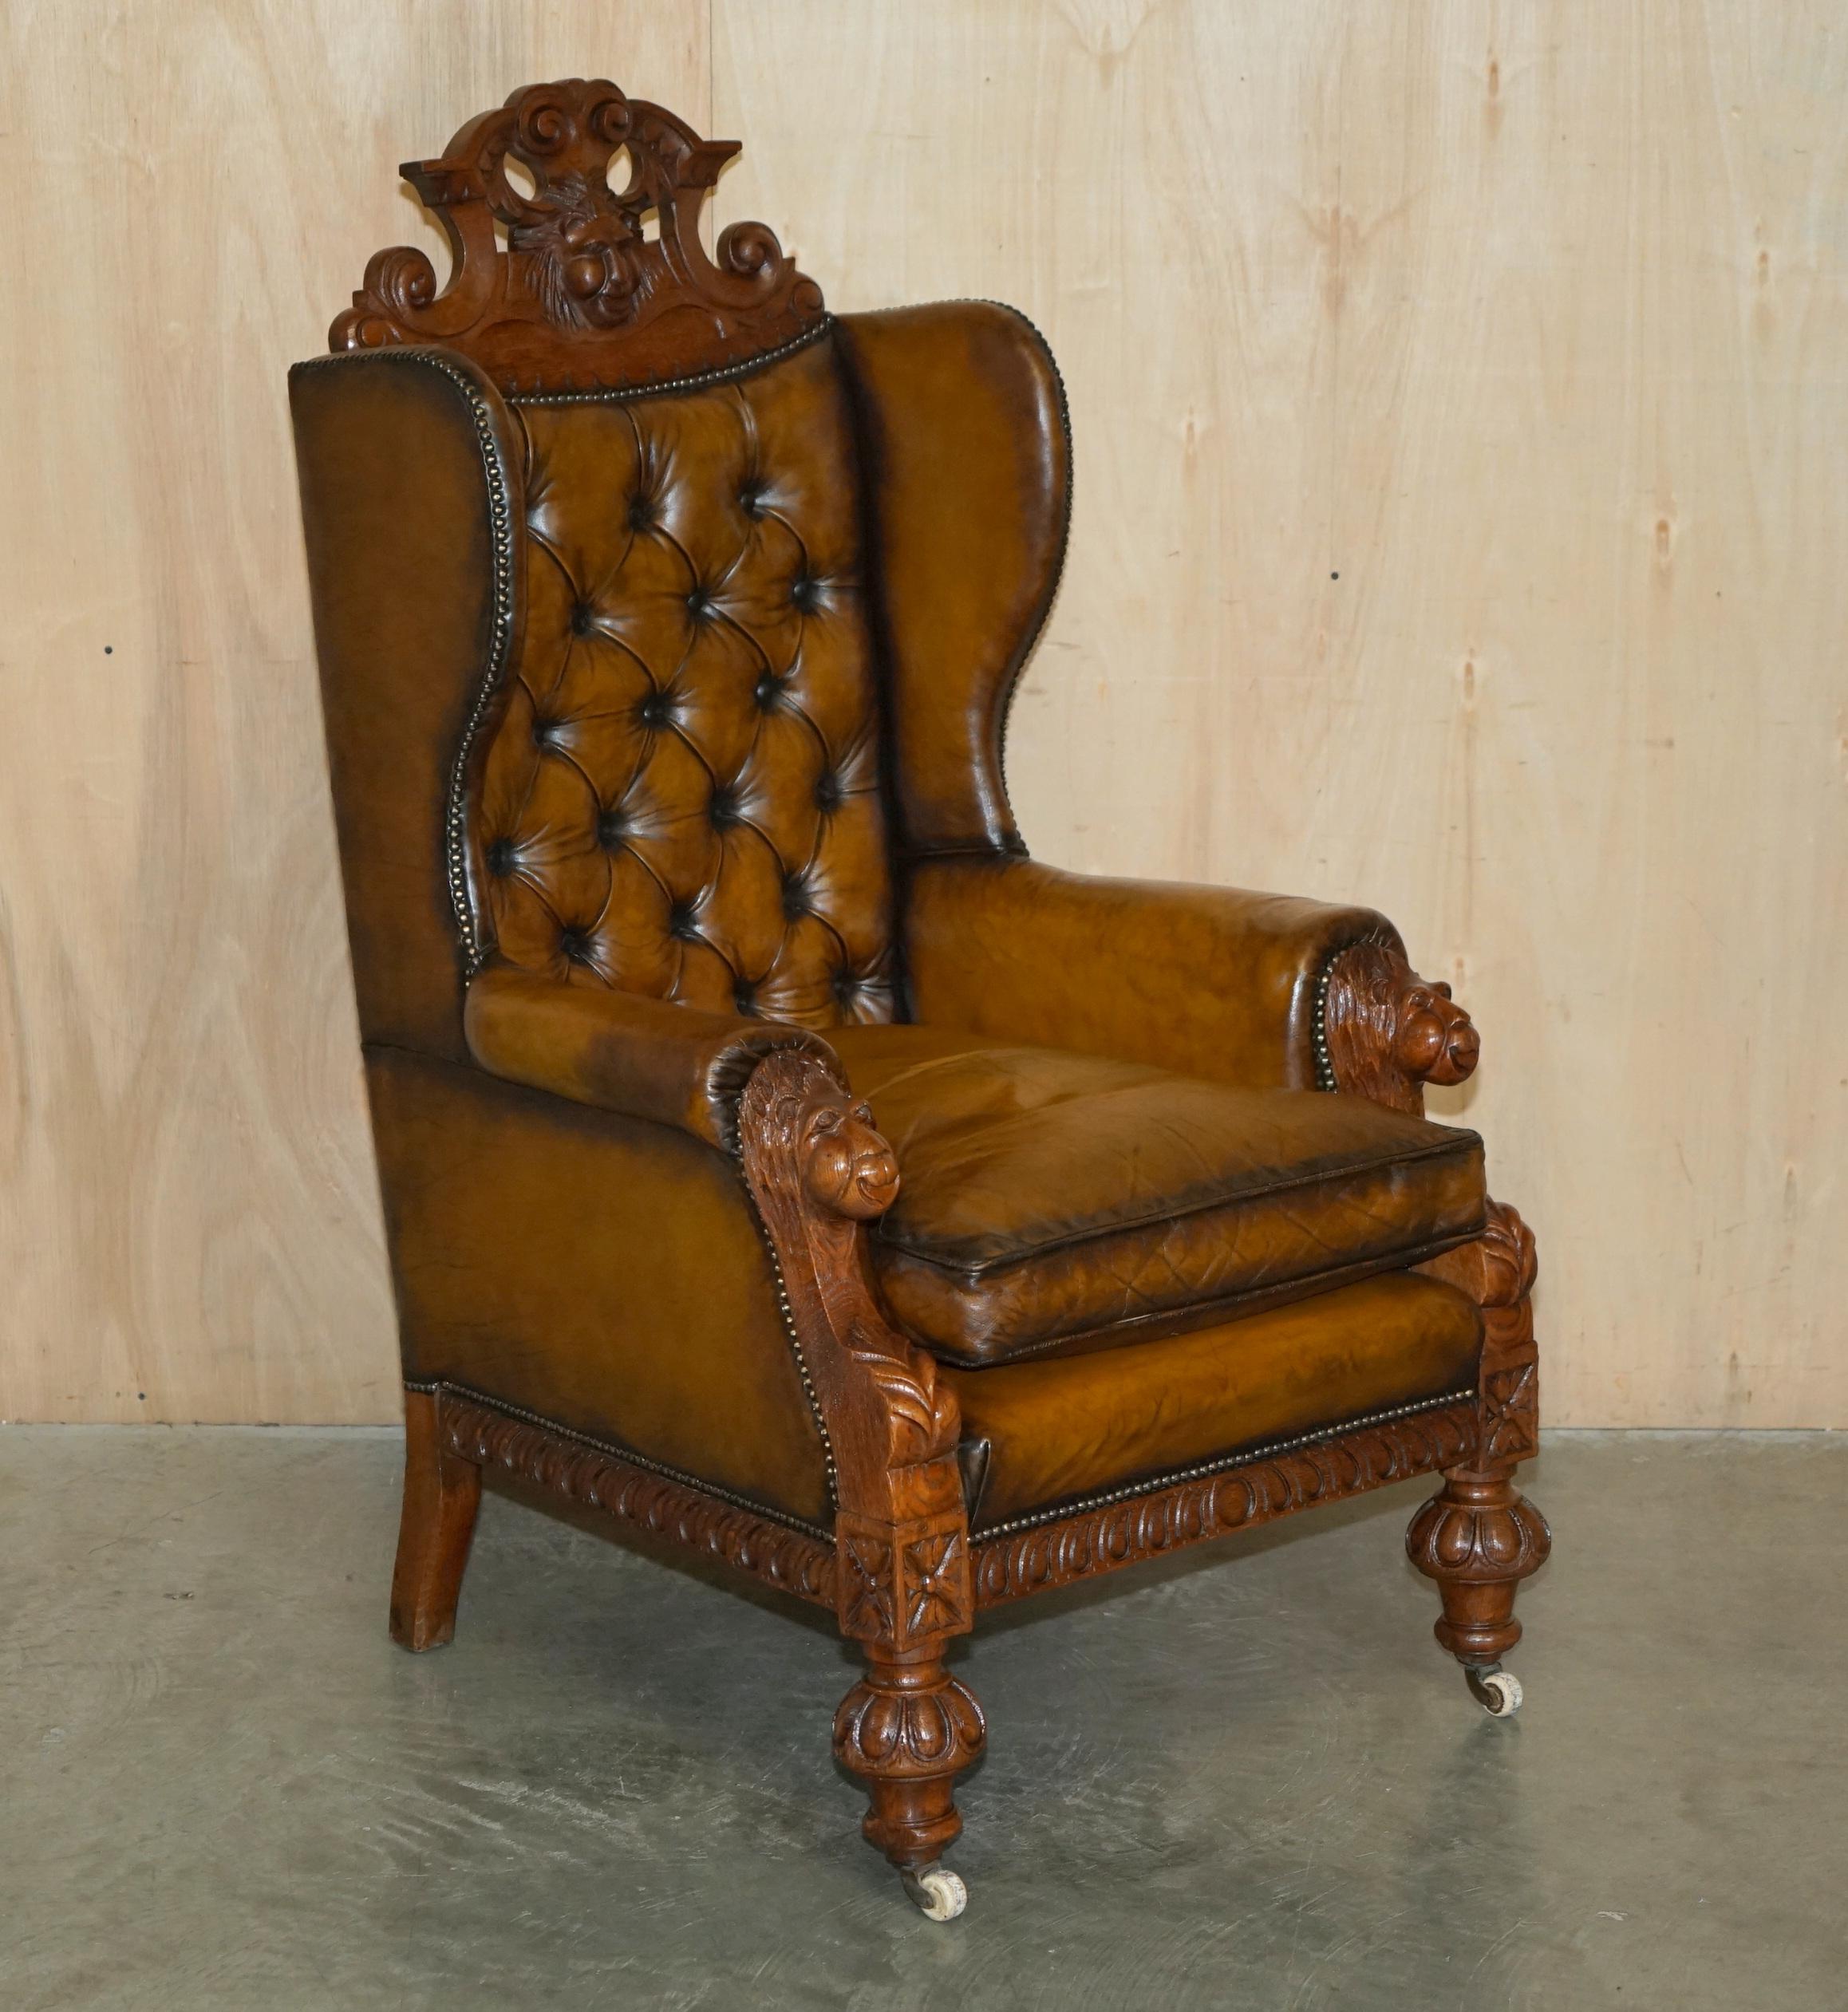 Royal House Antiques

Royal House Antiques is delighted to offer for sale this stunning pair of Antique hand carved oversized throne armchairs depicting Lion's heads for the arms and above the headrest with hand dyed brown leather Chesterfield